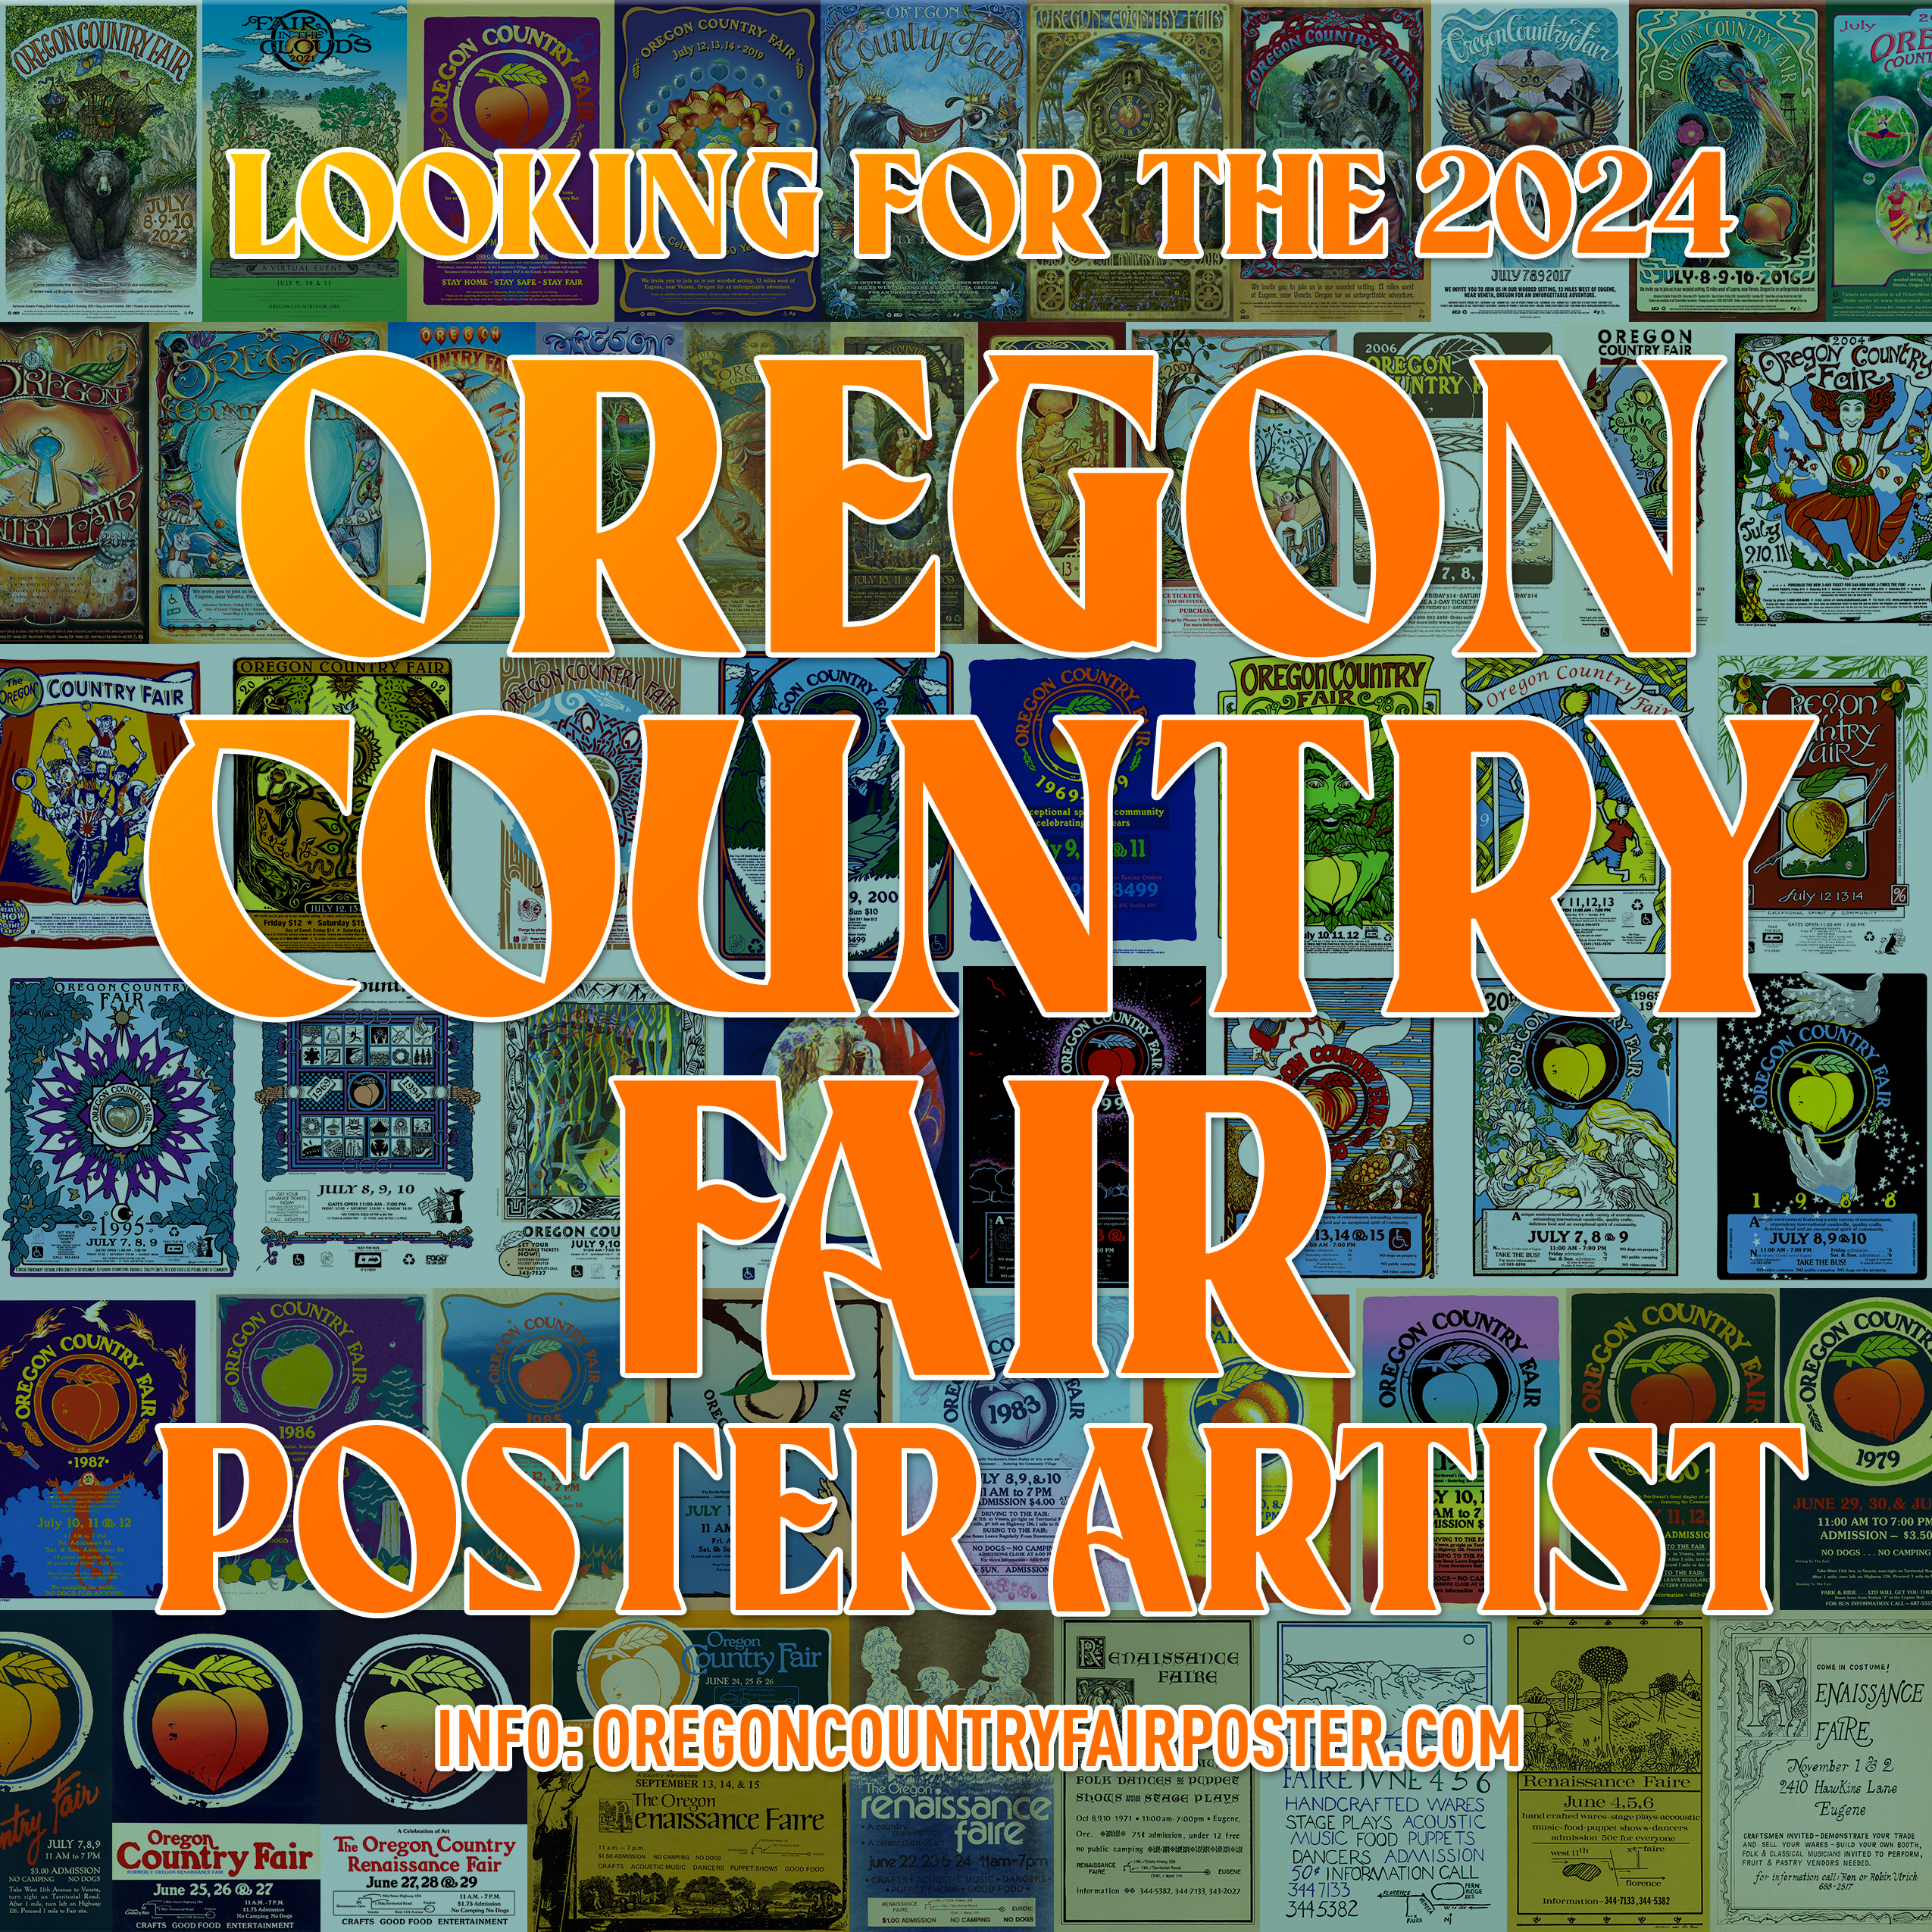 Oregon Country Fair Looking for the 2024 Poster Artist